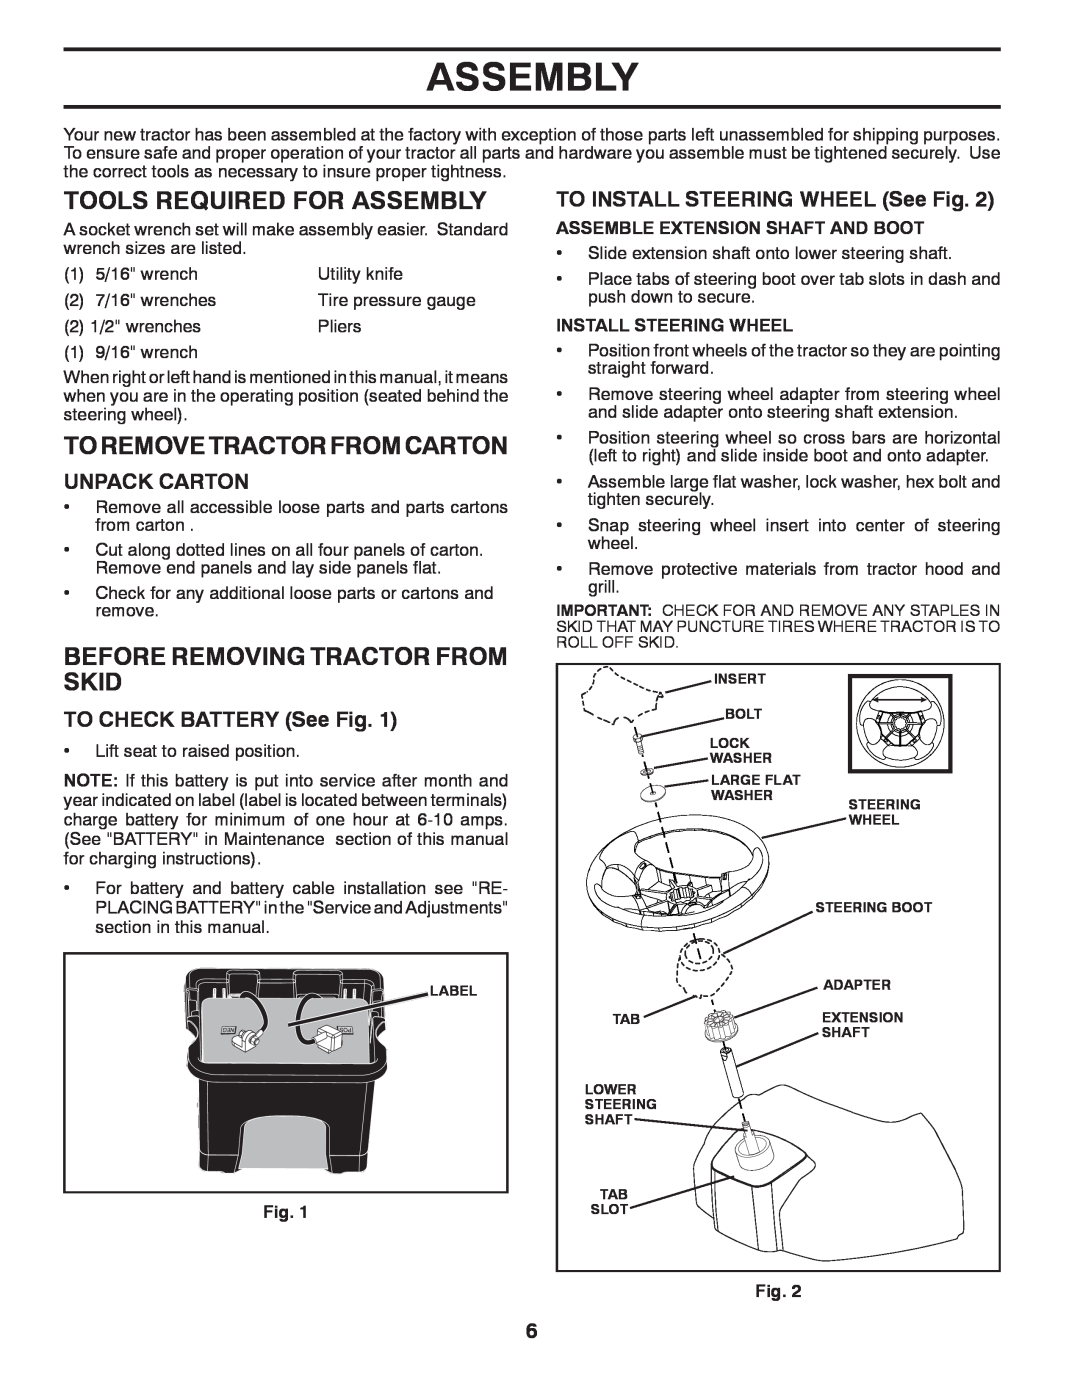 McCulloch 96041017700 manual Tools Required For Assembly, Toremovetractorfromcarton, Before Removing Tractor From Skid 